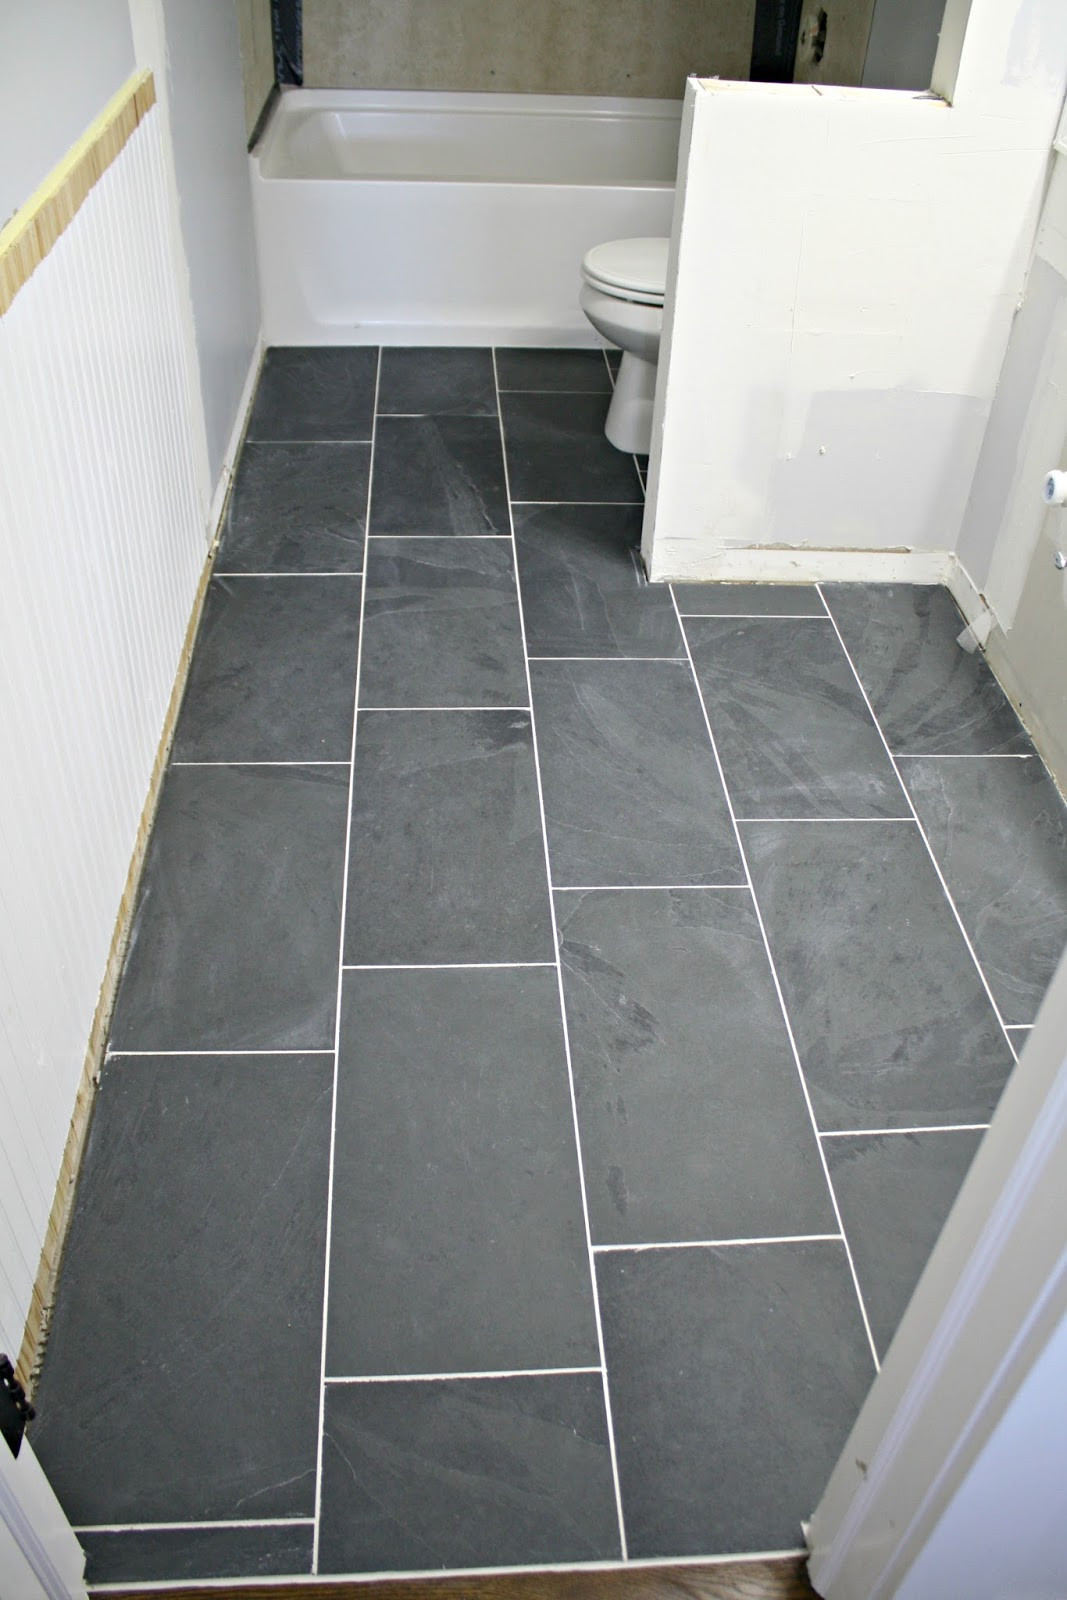 12X24 Tile In Small Bathroom
 How to tile a bathroom floor it s done